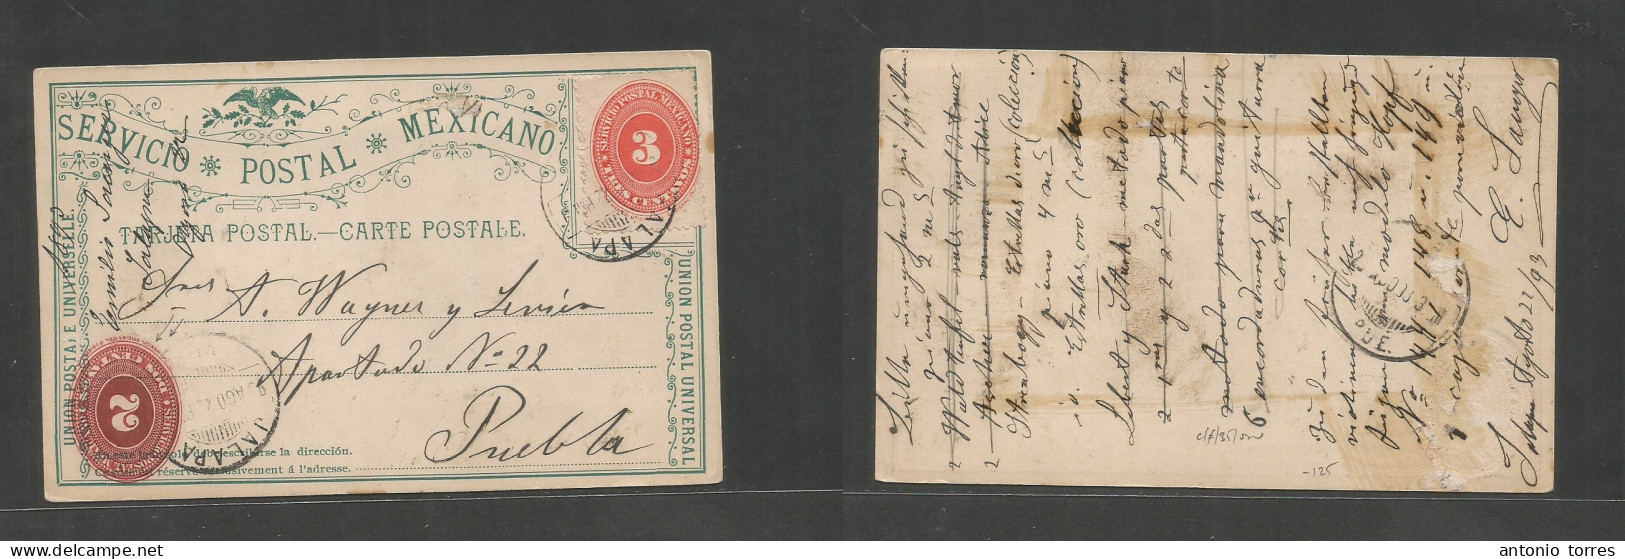 Mexico - Stationery. 1893 (22 Aug) Jalapa - Puebla. SPM 3c Vermelion Large Numeral Stat Card + 3c Red Adtl Inverted Prin - Mexique